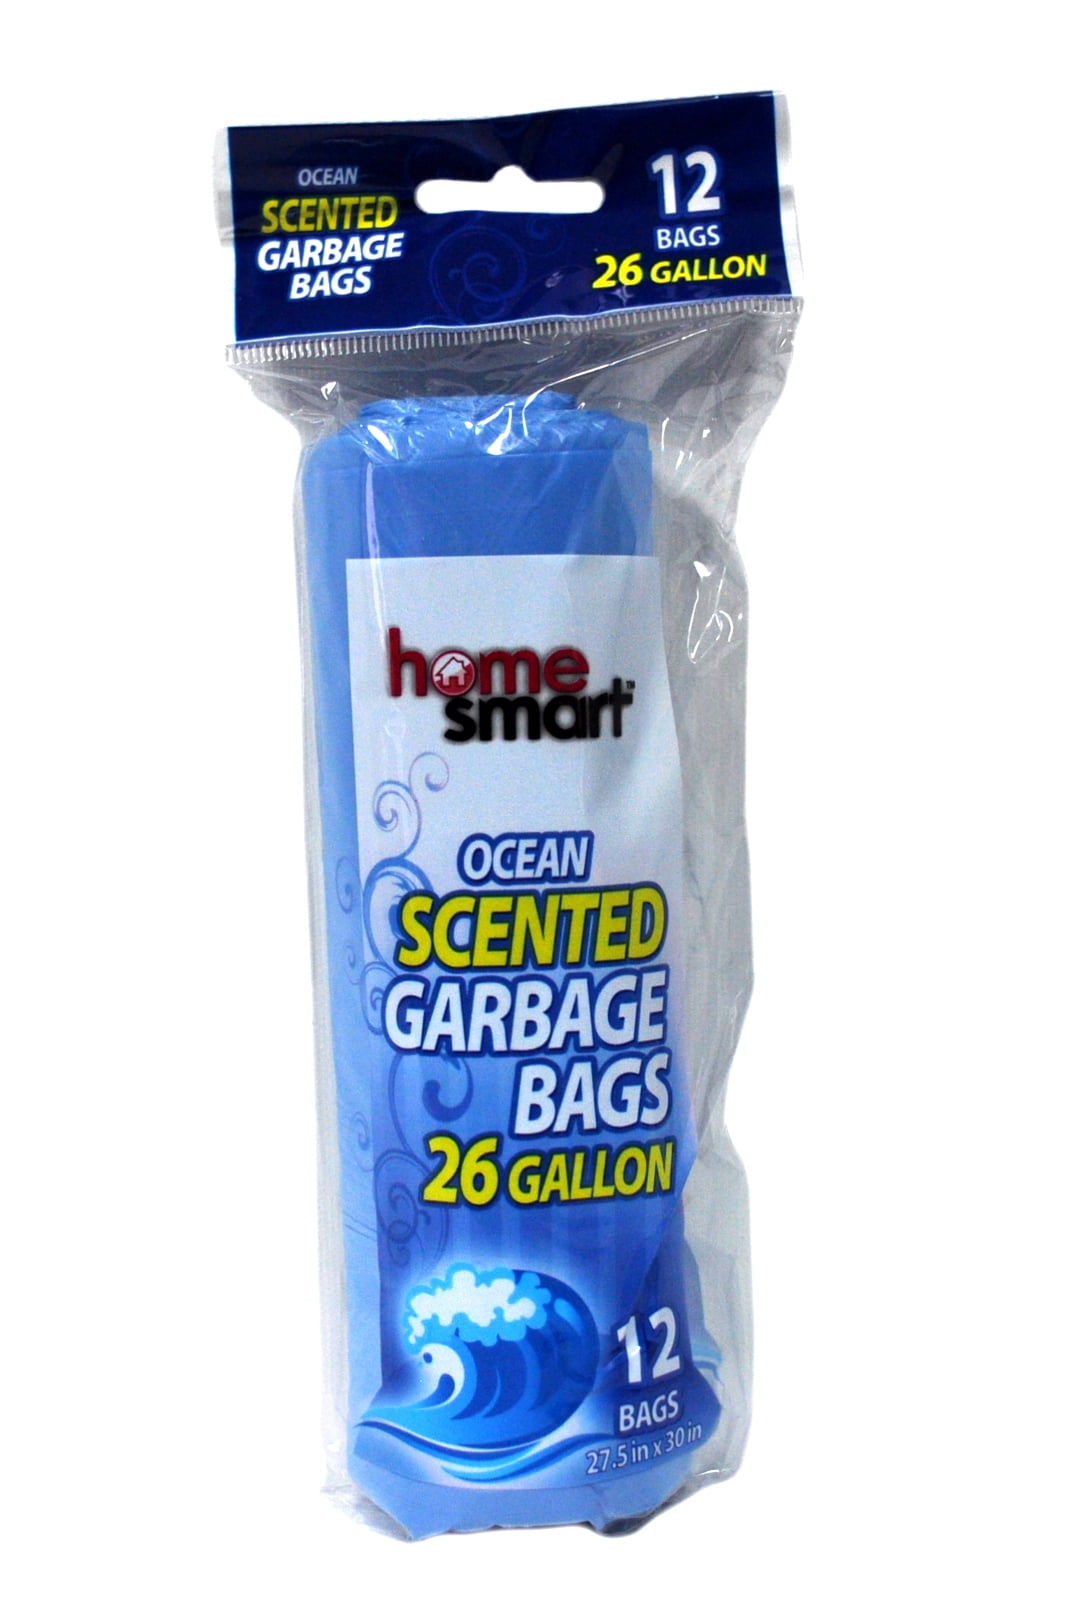 HomeSmart Scented Garbage Bags - 26 Gallon Variety Pack, Whole Case